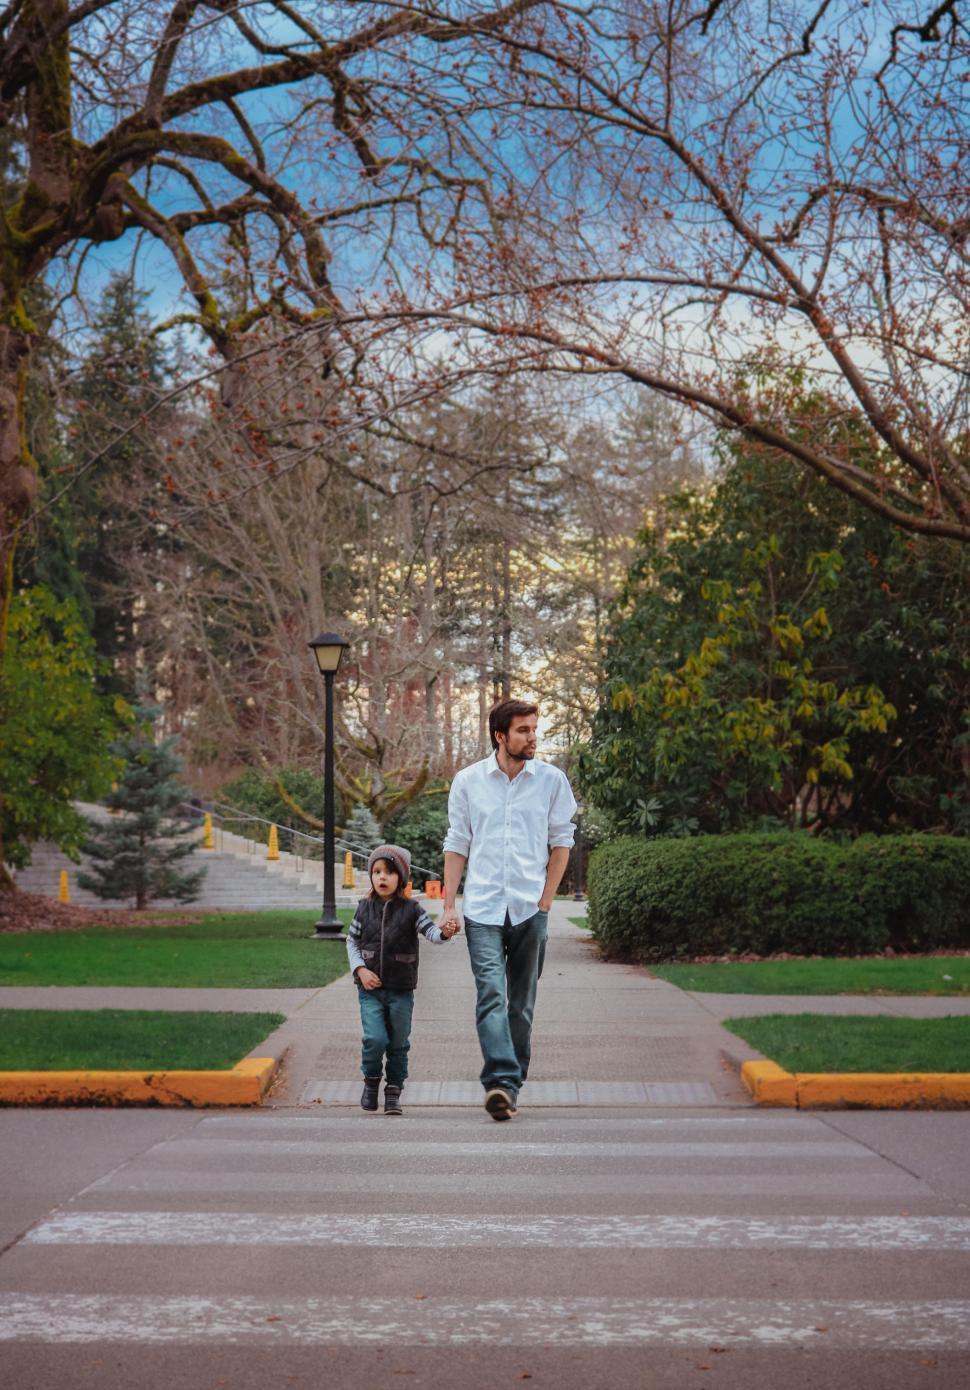 Free Image of Father and Son crossing a road with trees in the background  